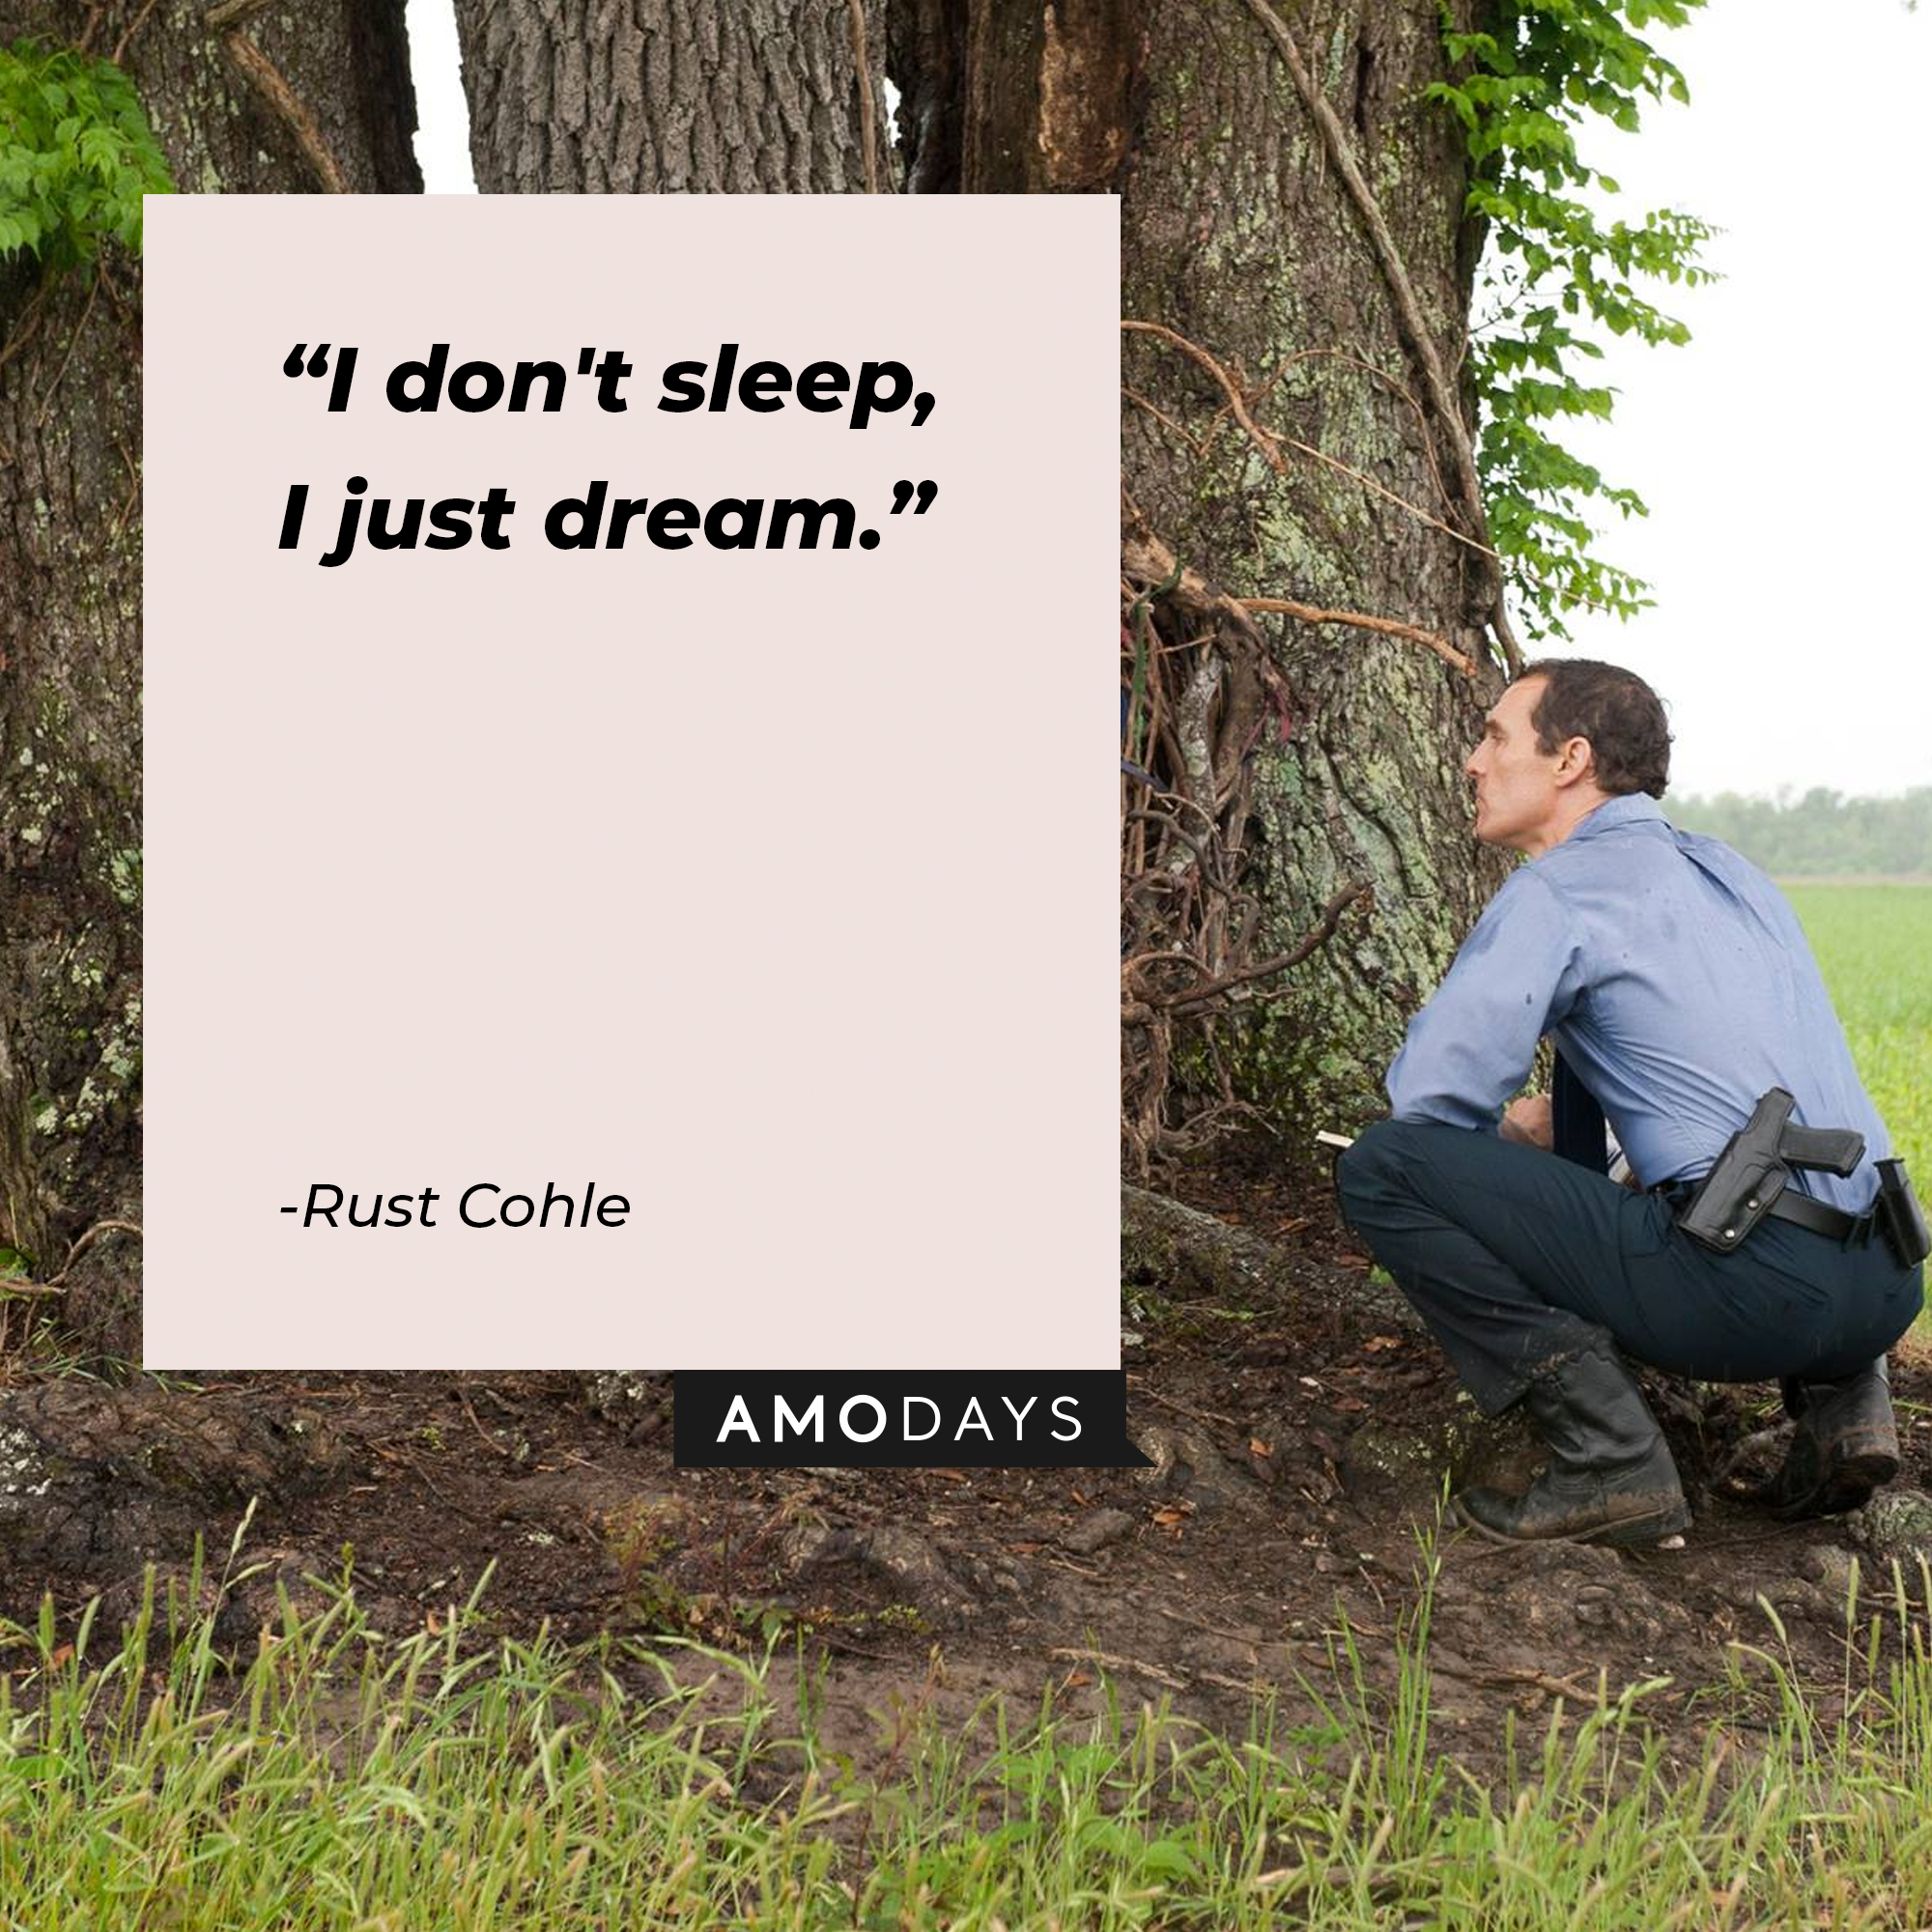 A photo of Rust Cohle with the quote, "I don't sleep, I just dream." | Source: Facebook/TrueDetective